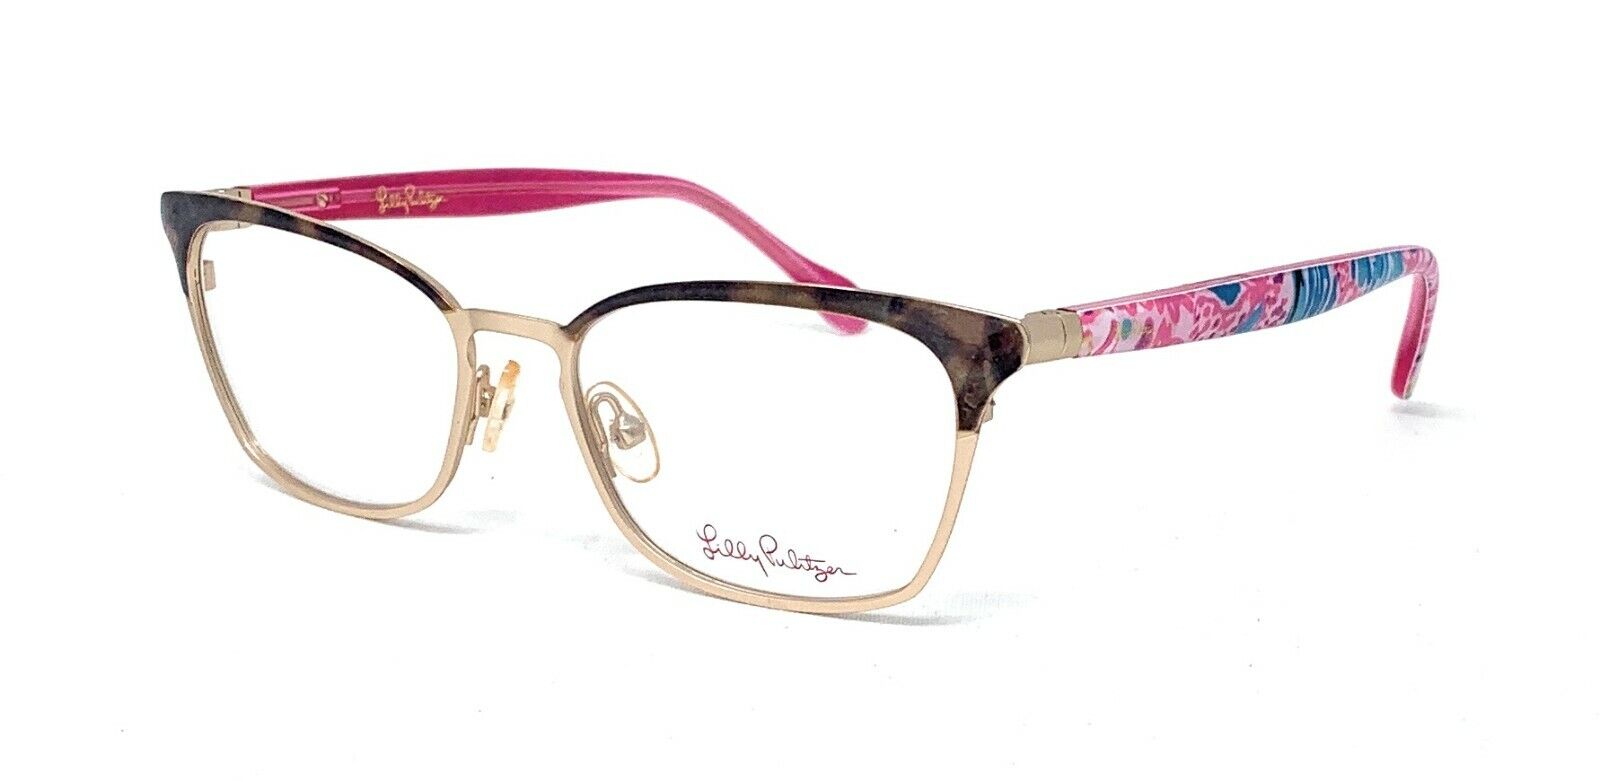 New Authentic LILLY PULITZER Eyeglasses Barlowe TO Toroise Pink 50mm